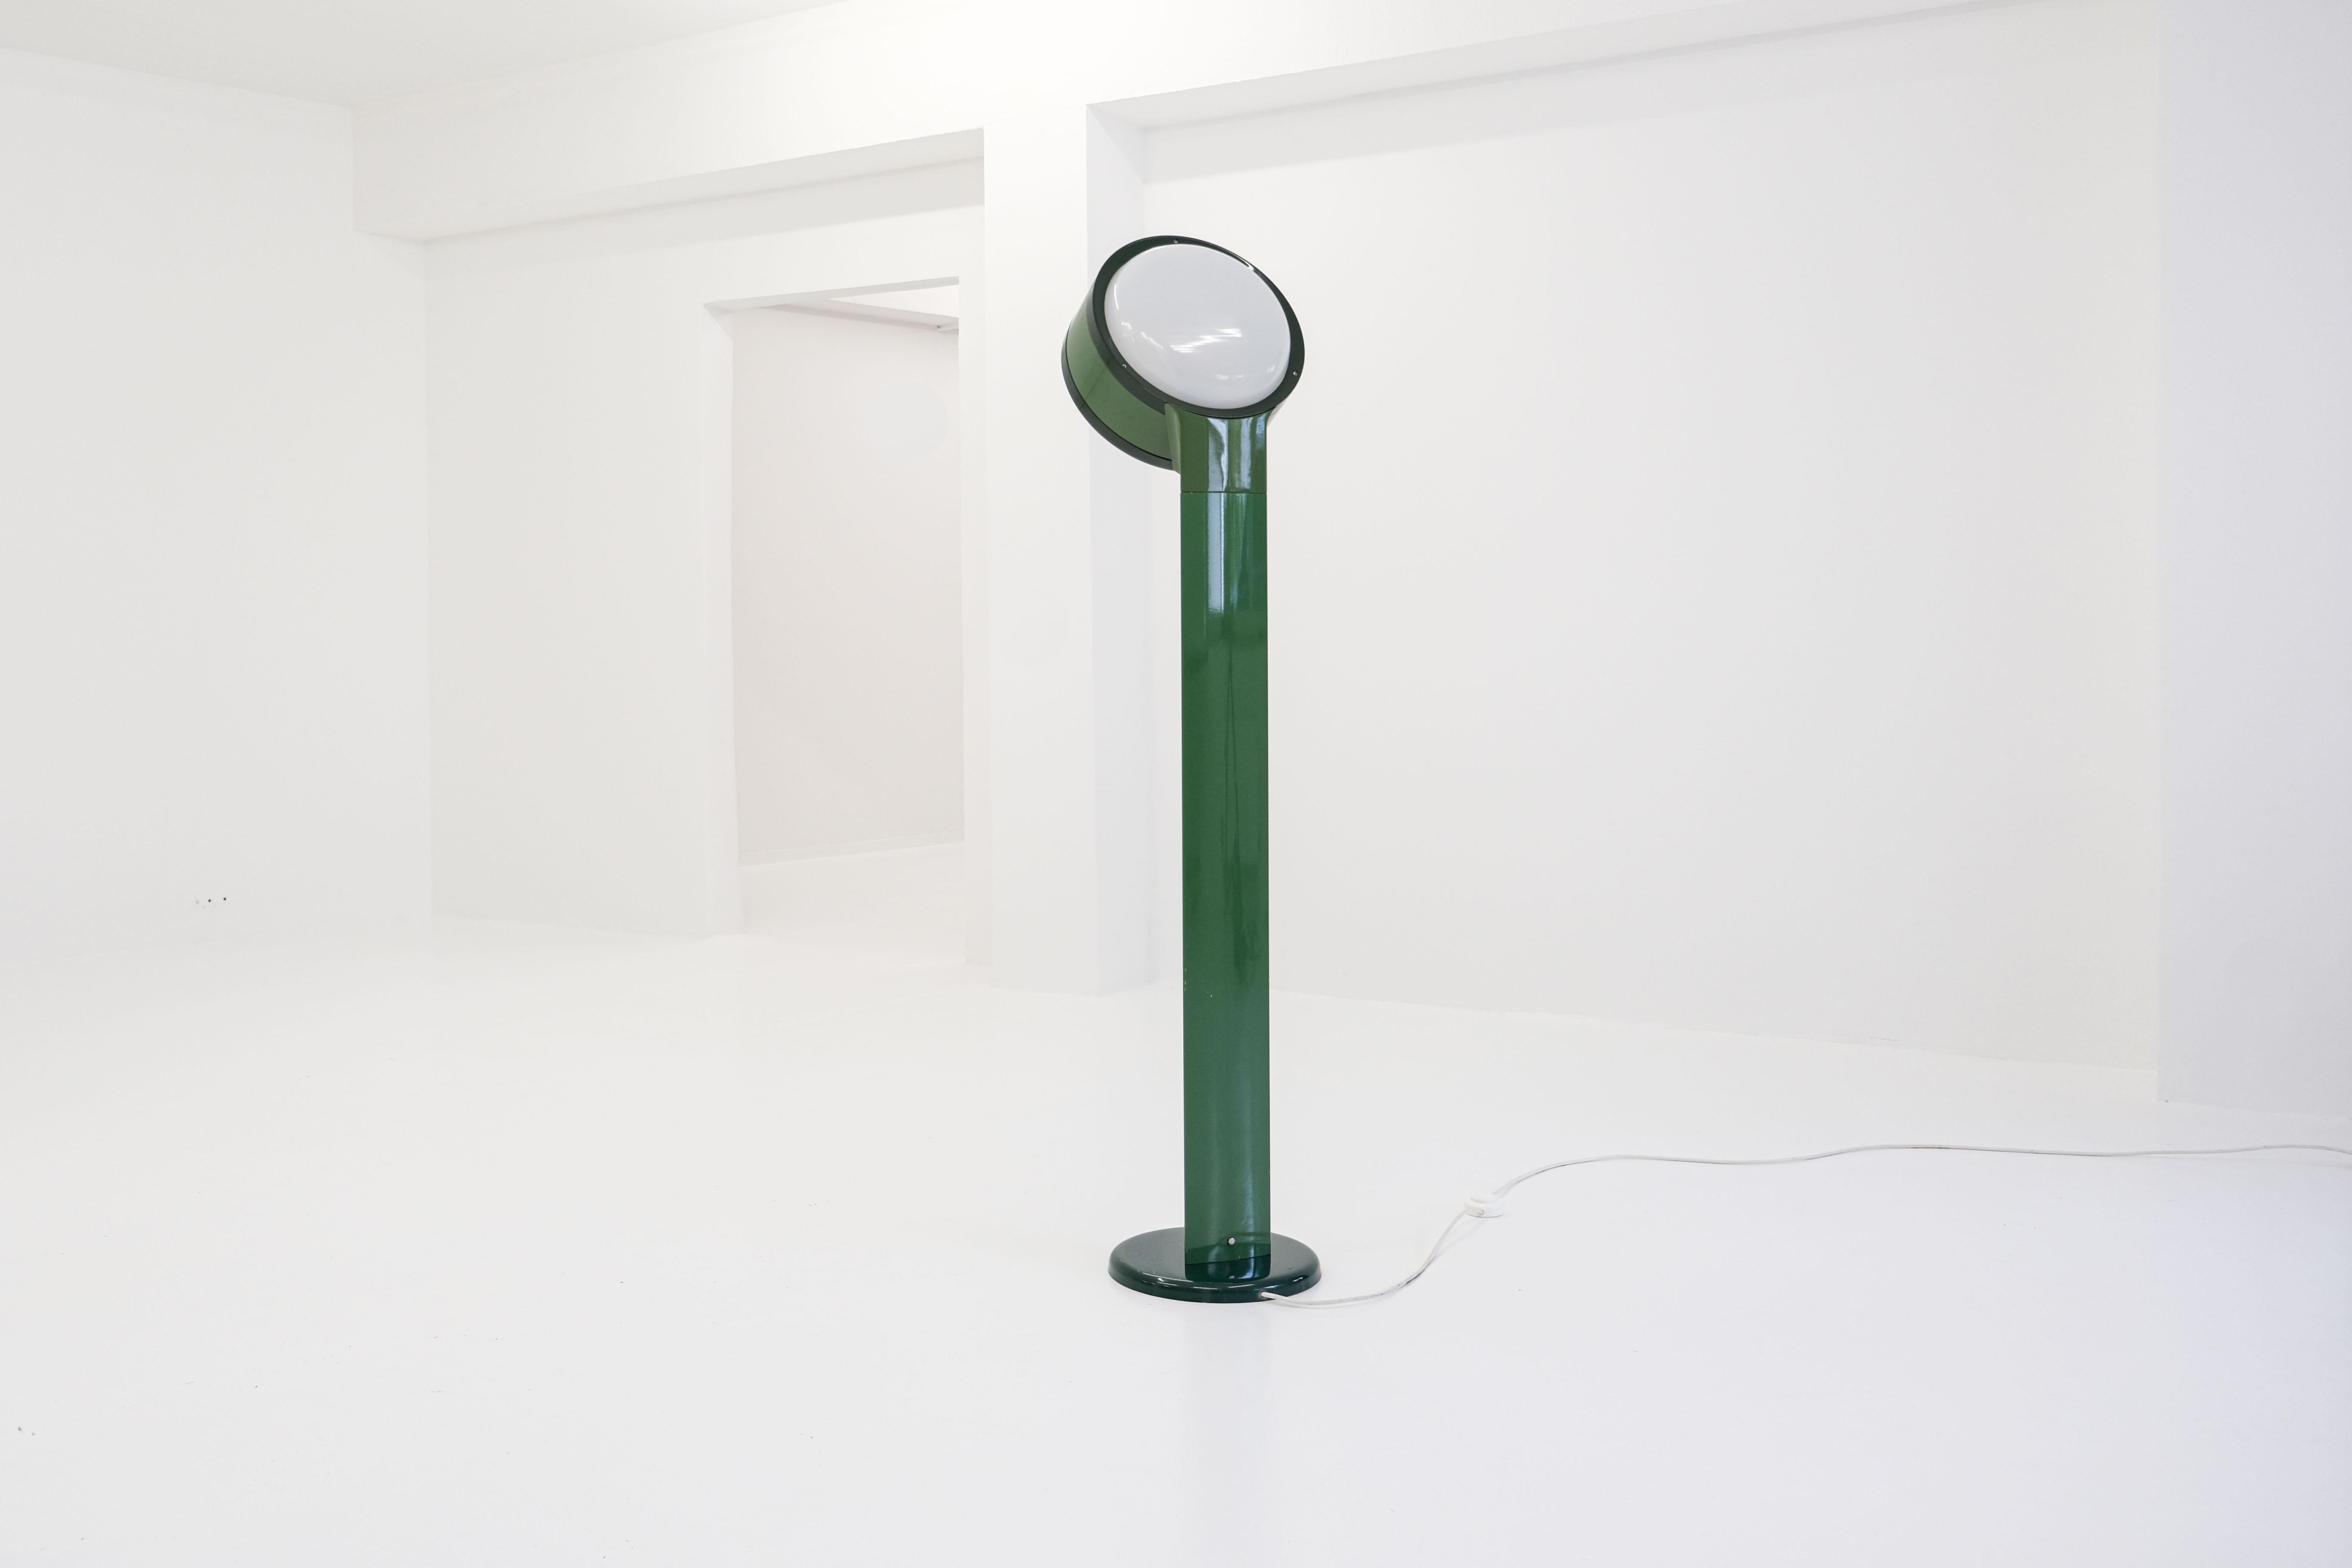 Late 20th Century Tamburo Floor Lamp by Afra & Tobia Scarpa for Flos for Inside and Outside Use